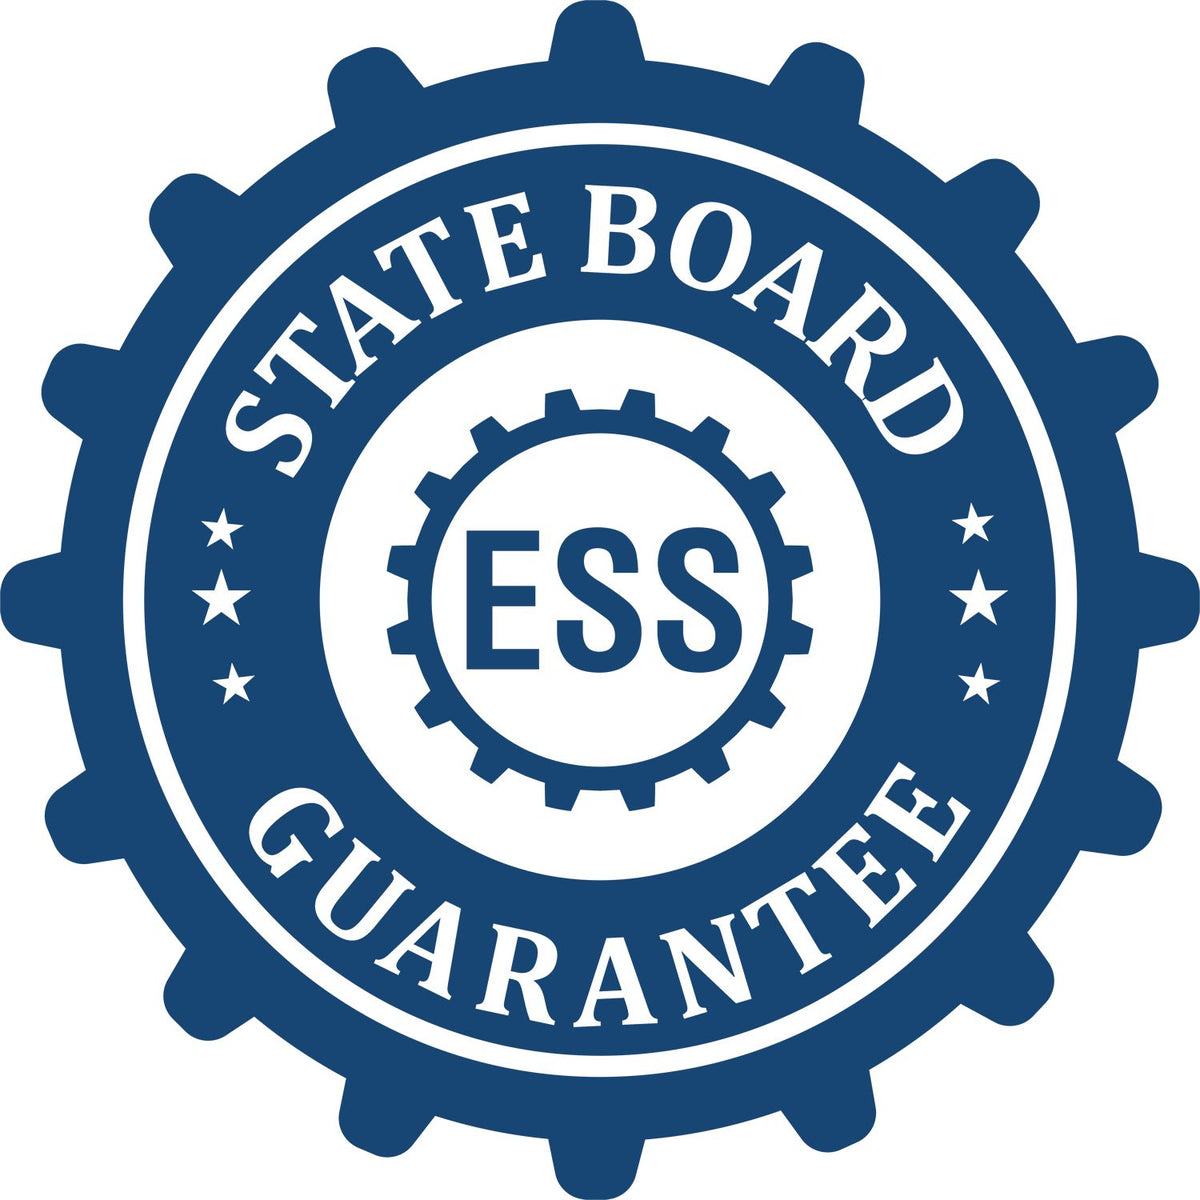 An emblem in a gear shape illustrating a state board guarantee for the Heavy Duty Cast Iron Montana Engineer Seal Embosser product.